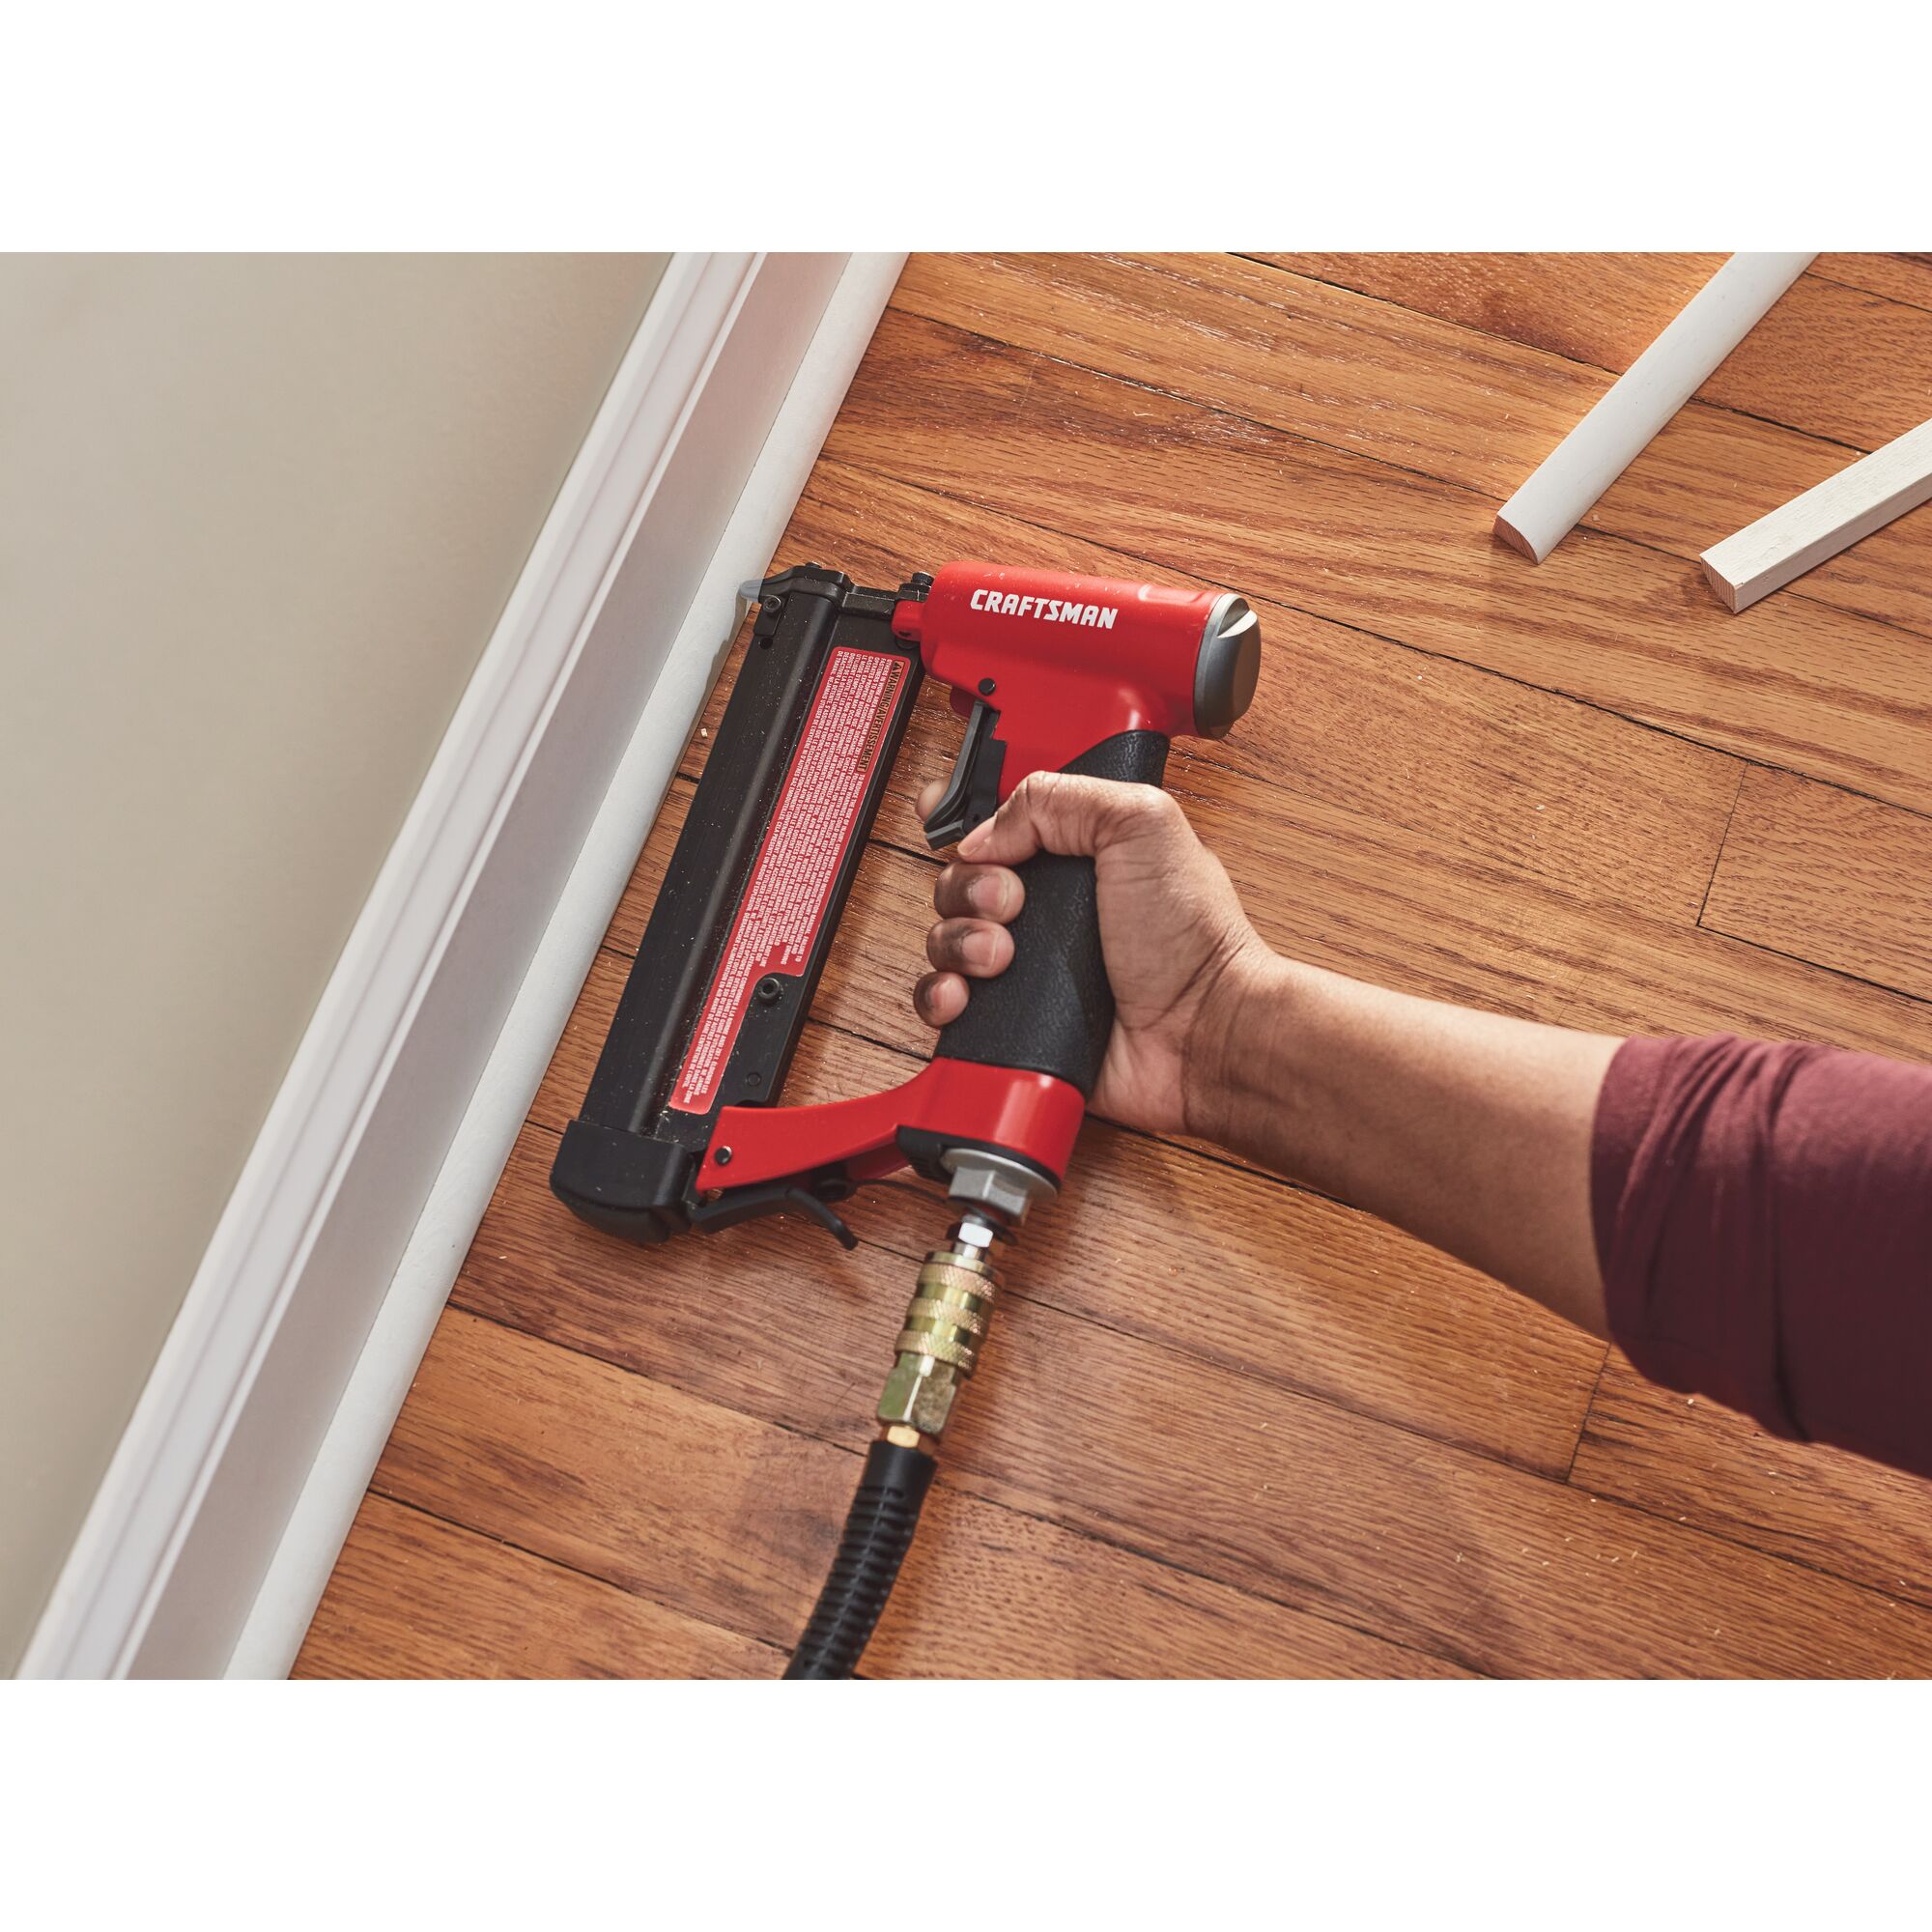 View of CRAFTSMAN Nailer: Pin being used by consumer